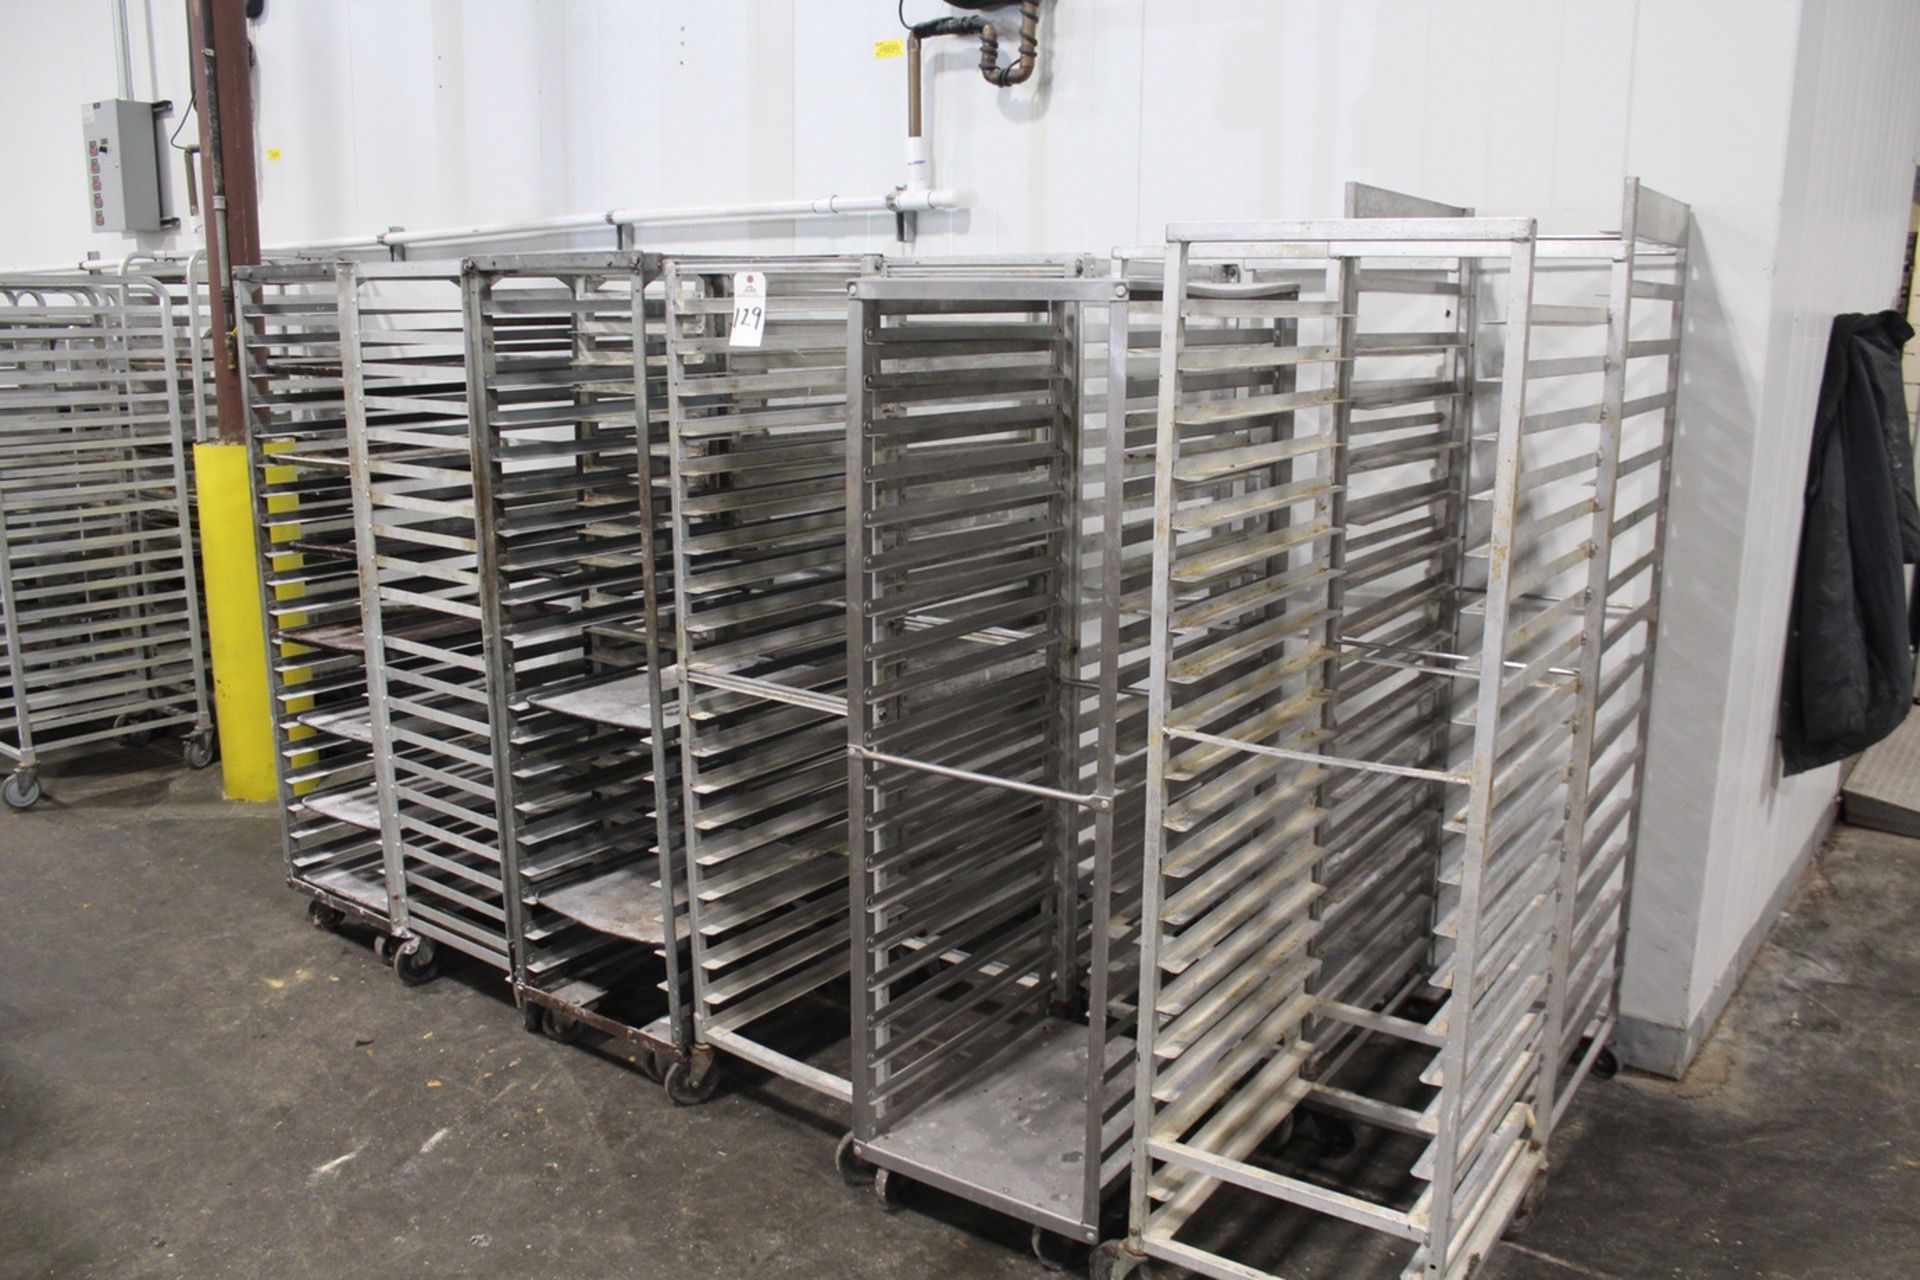 Lot of (12) Bakers Oven Racks | Rigging and Loading Fee: Hand Carry Or Contact Rigger